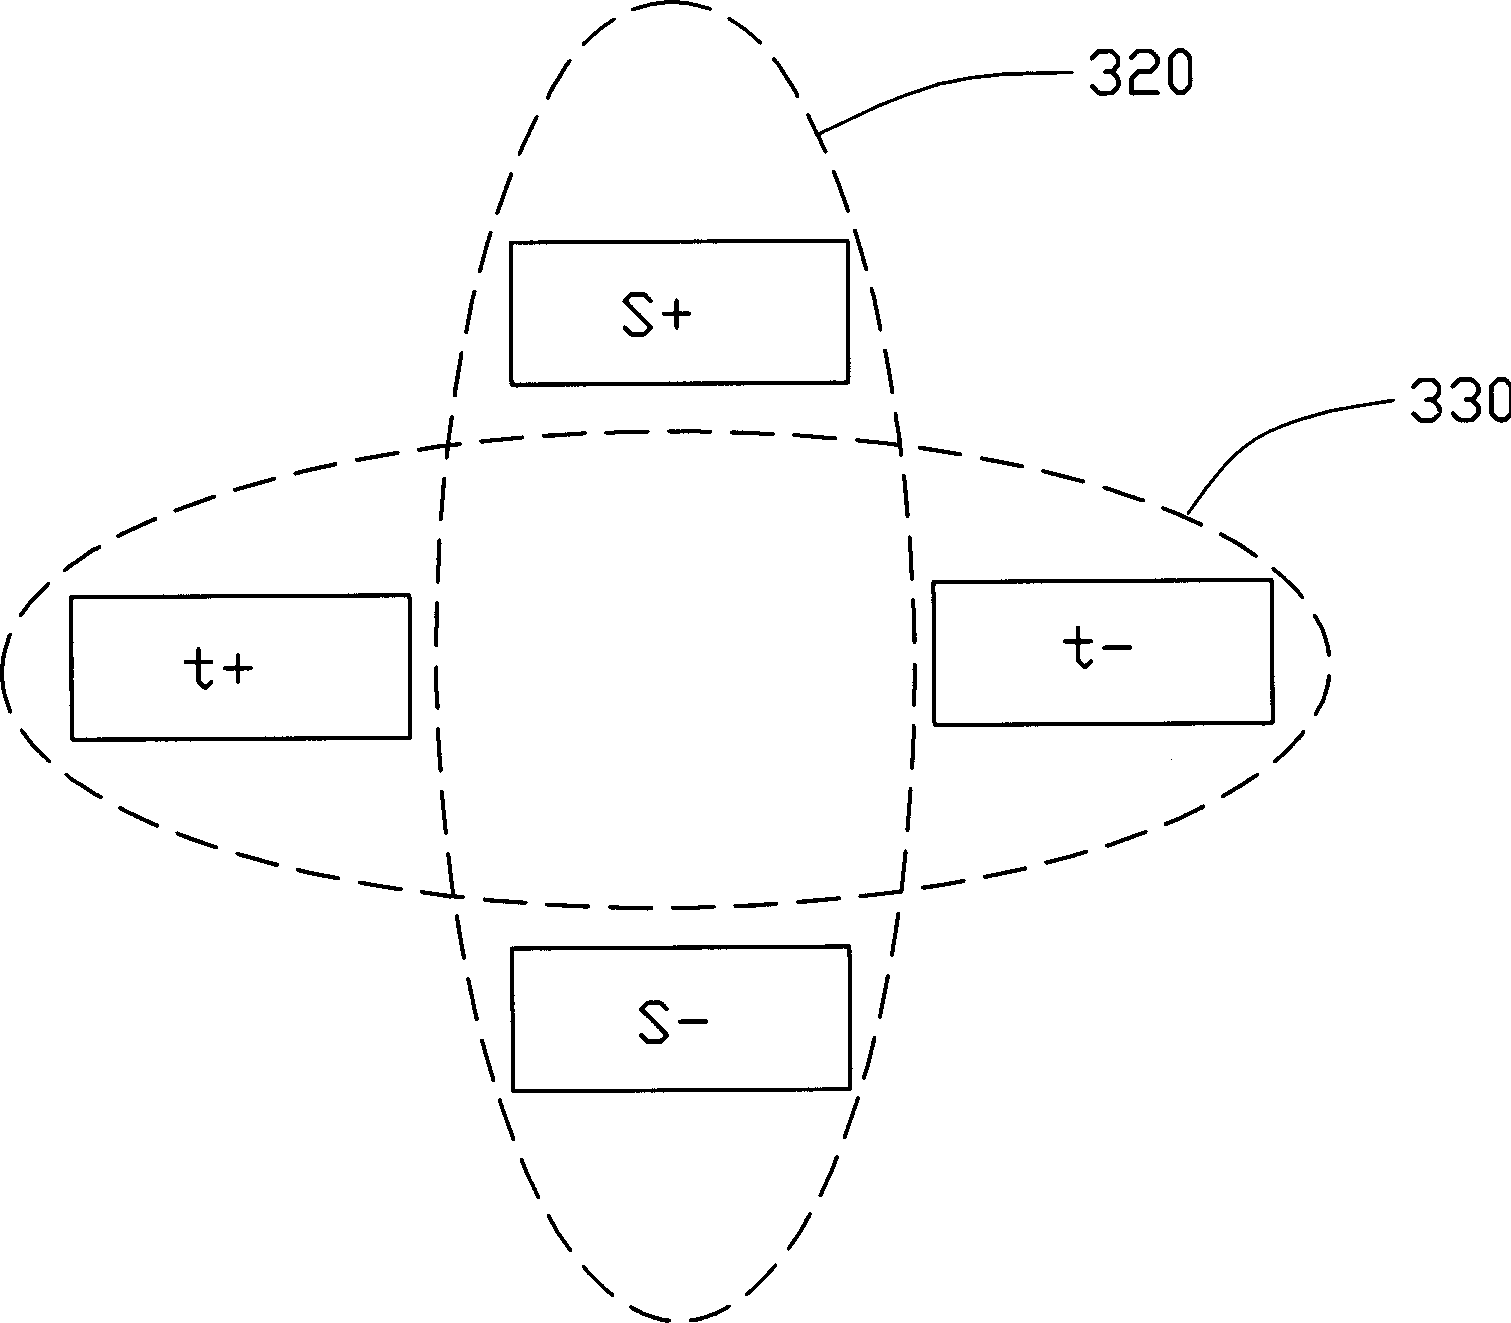 Differential wire assembling method for eliminating high speed board interferes